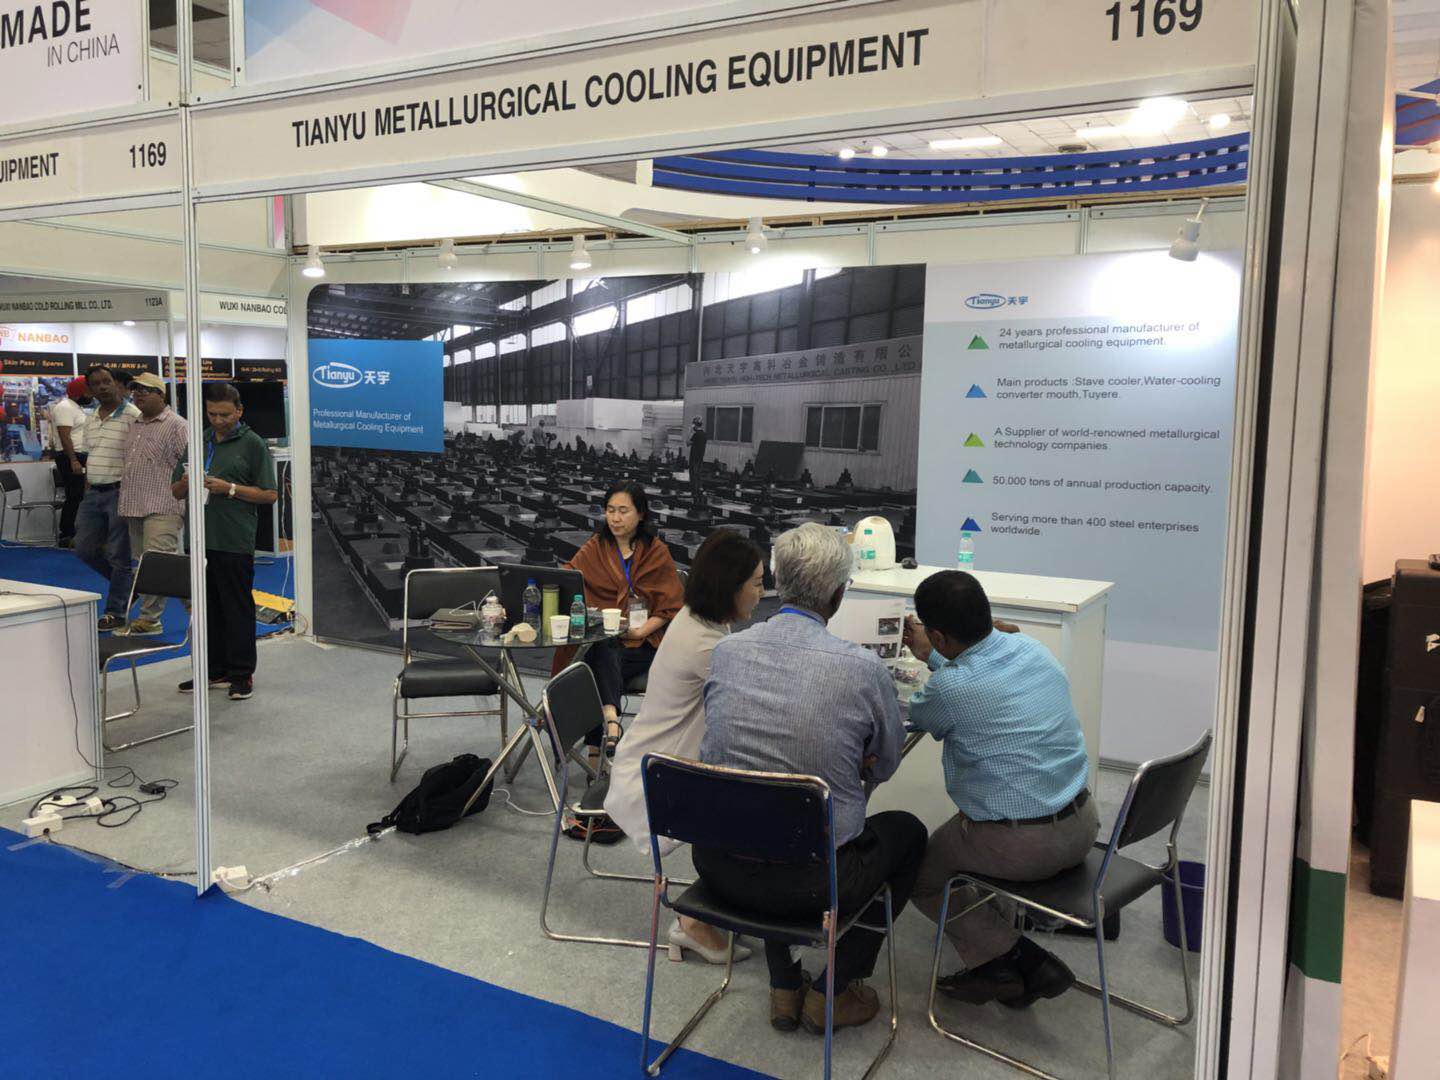 Tianyu participates in India's 12 th MMMM Expo in Delhi